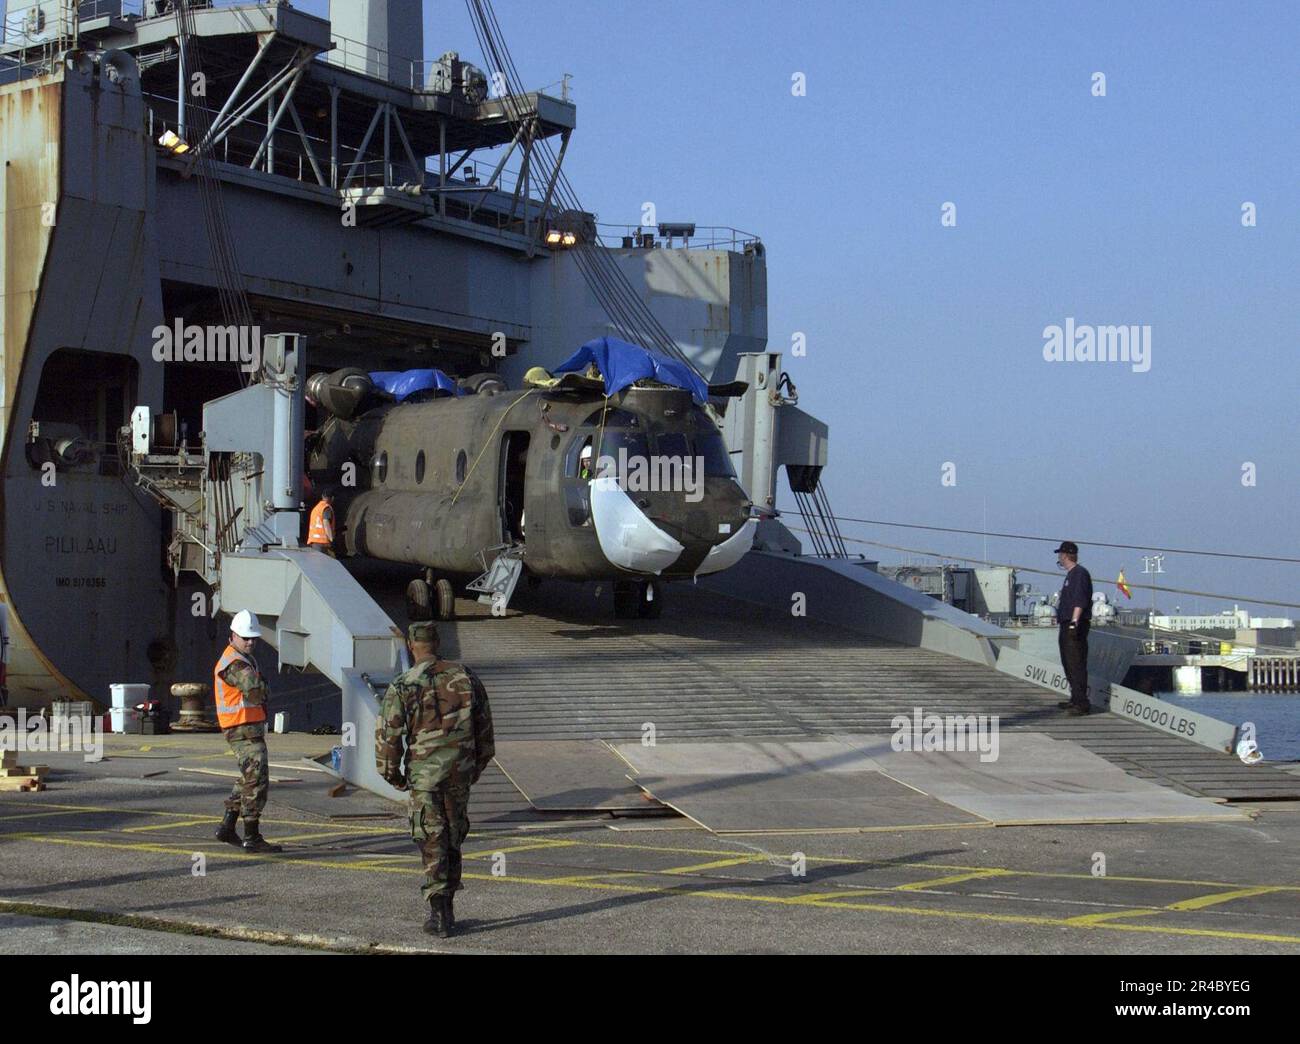 US Navy  A U.S. Army CH-47 Chinook helicopter is offloaded from the Military Sealift Command (MSC) roll-on-roll-off ship USNS Pililaau (T-AKR 304). Stock Photo